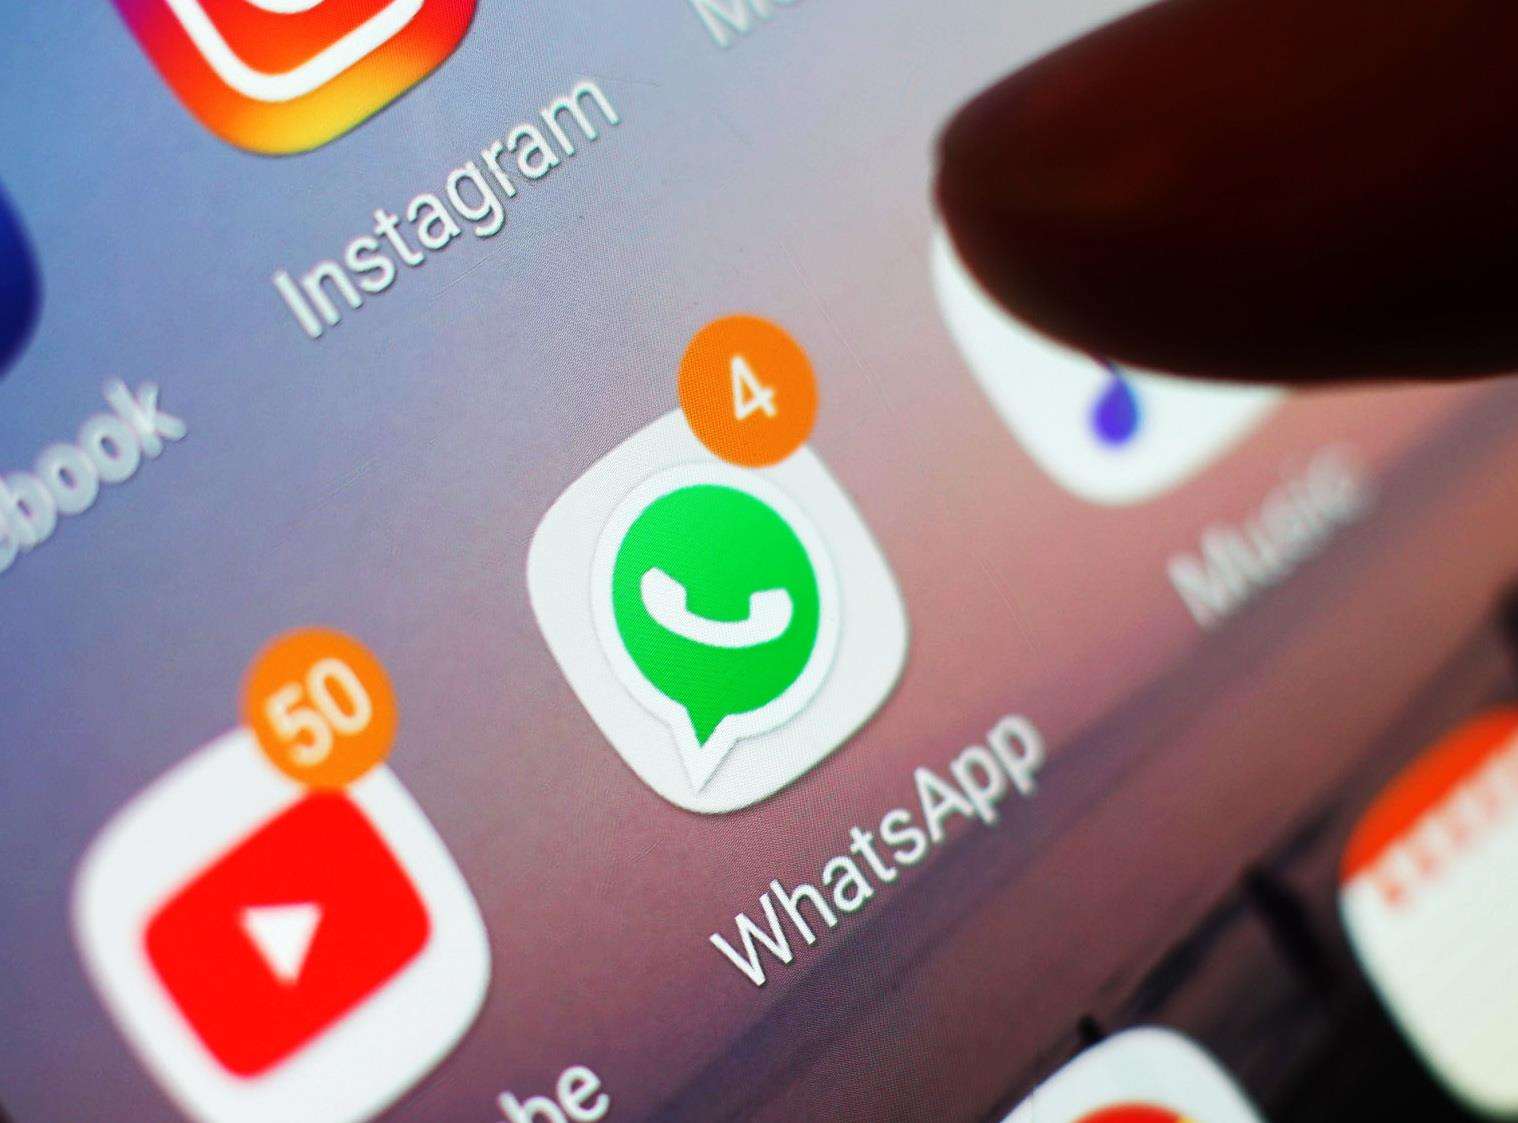 Keep up to date with news affecting Kent with as a subscriber to KentOnline's WhatsApp service